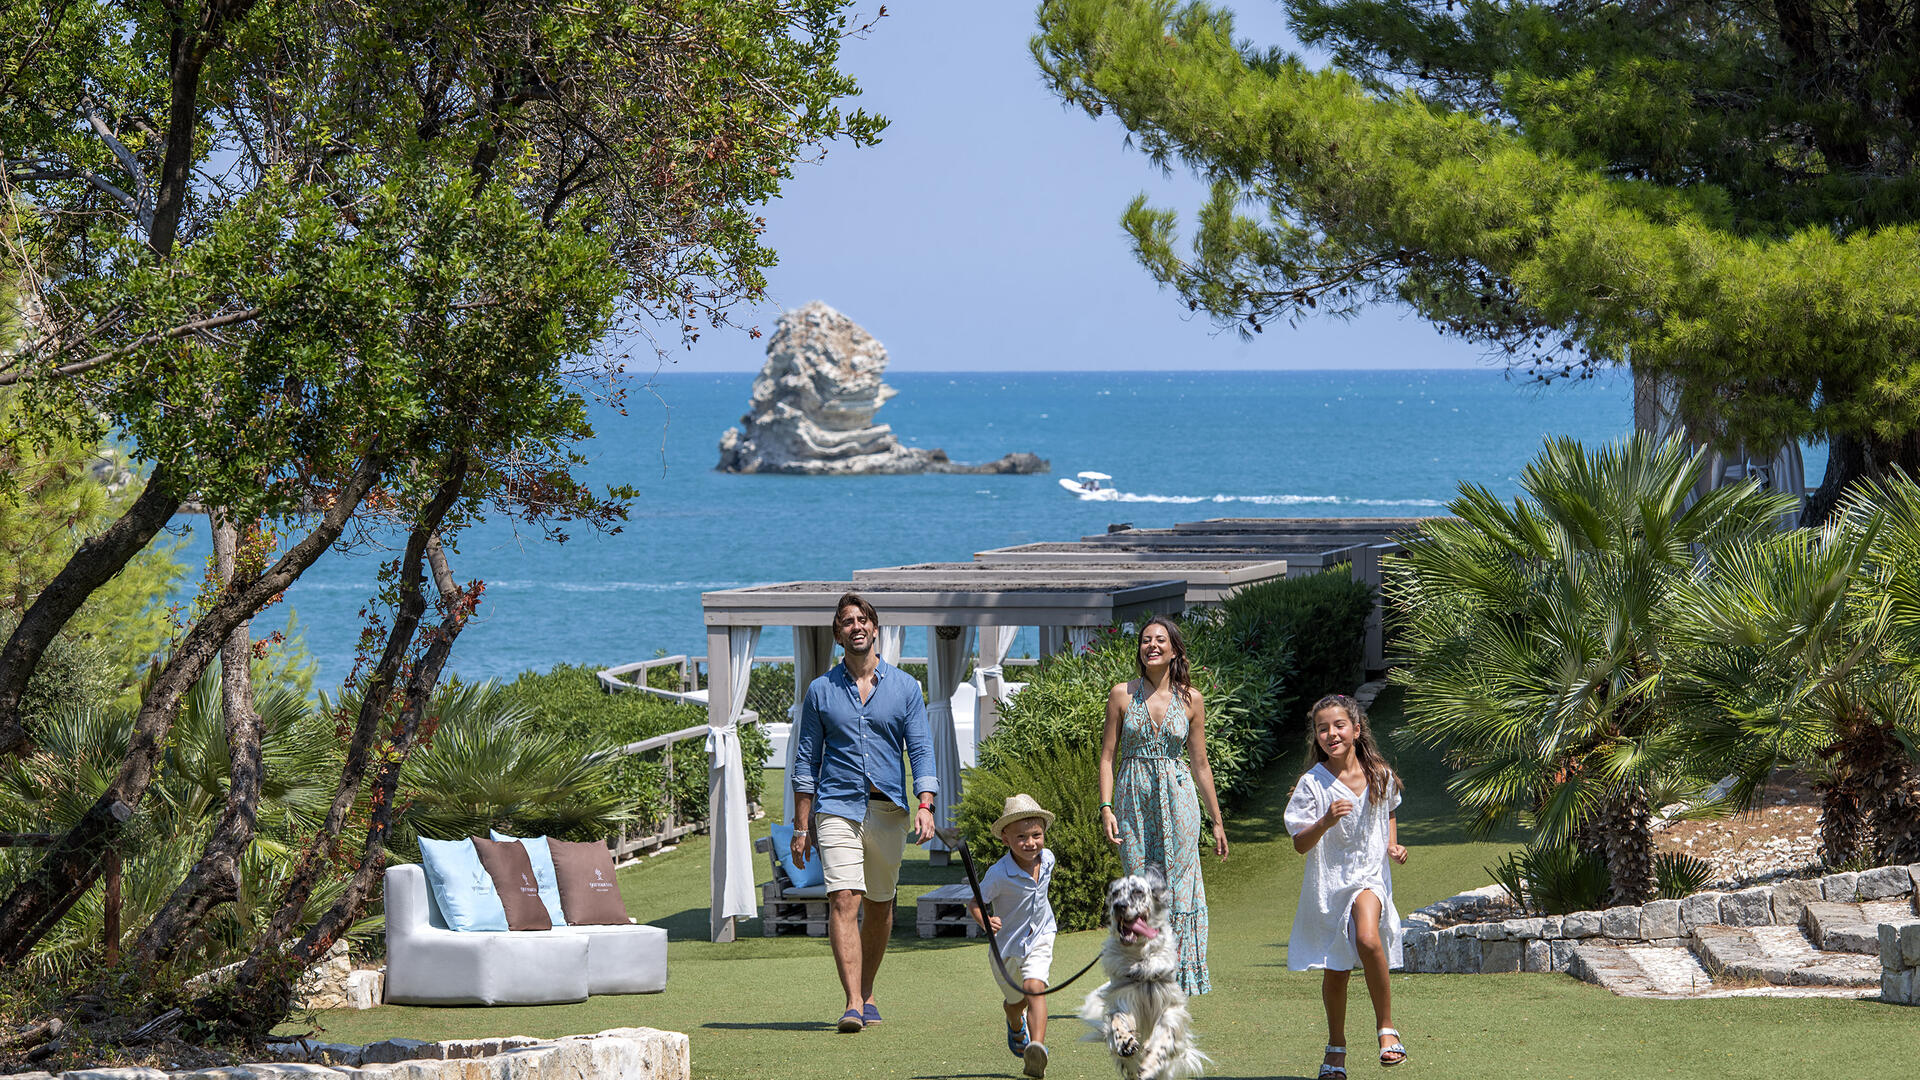 Family-friendly hotel resort in Italy with private beach